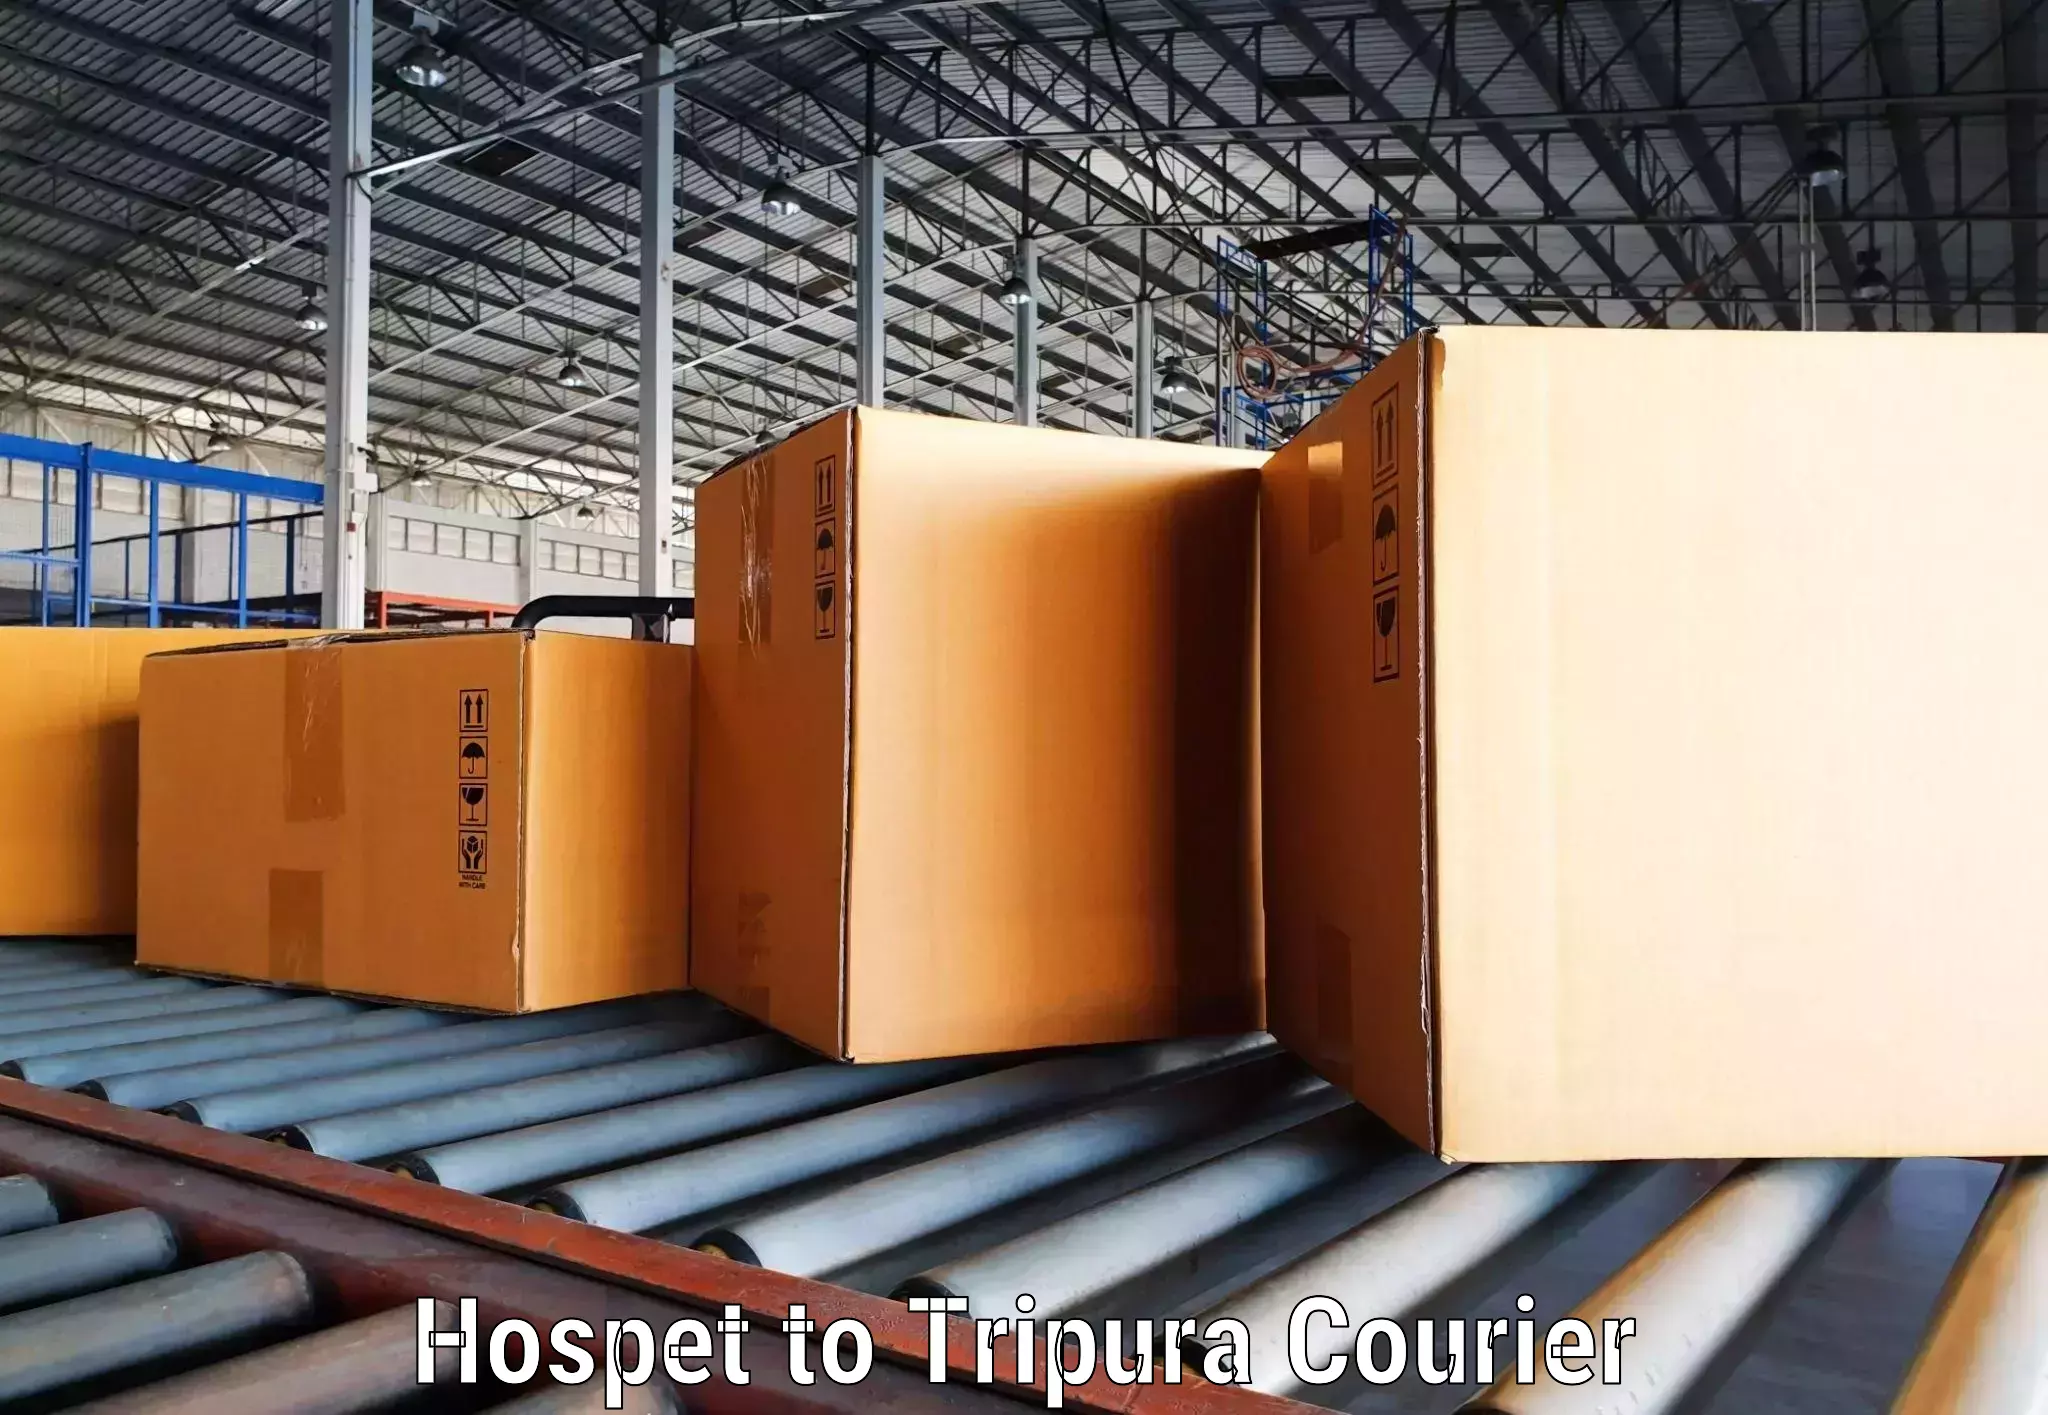 Express delivery capabilities in Hospet to Udaipur Tripura